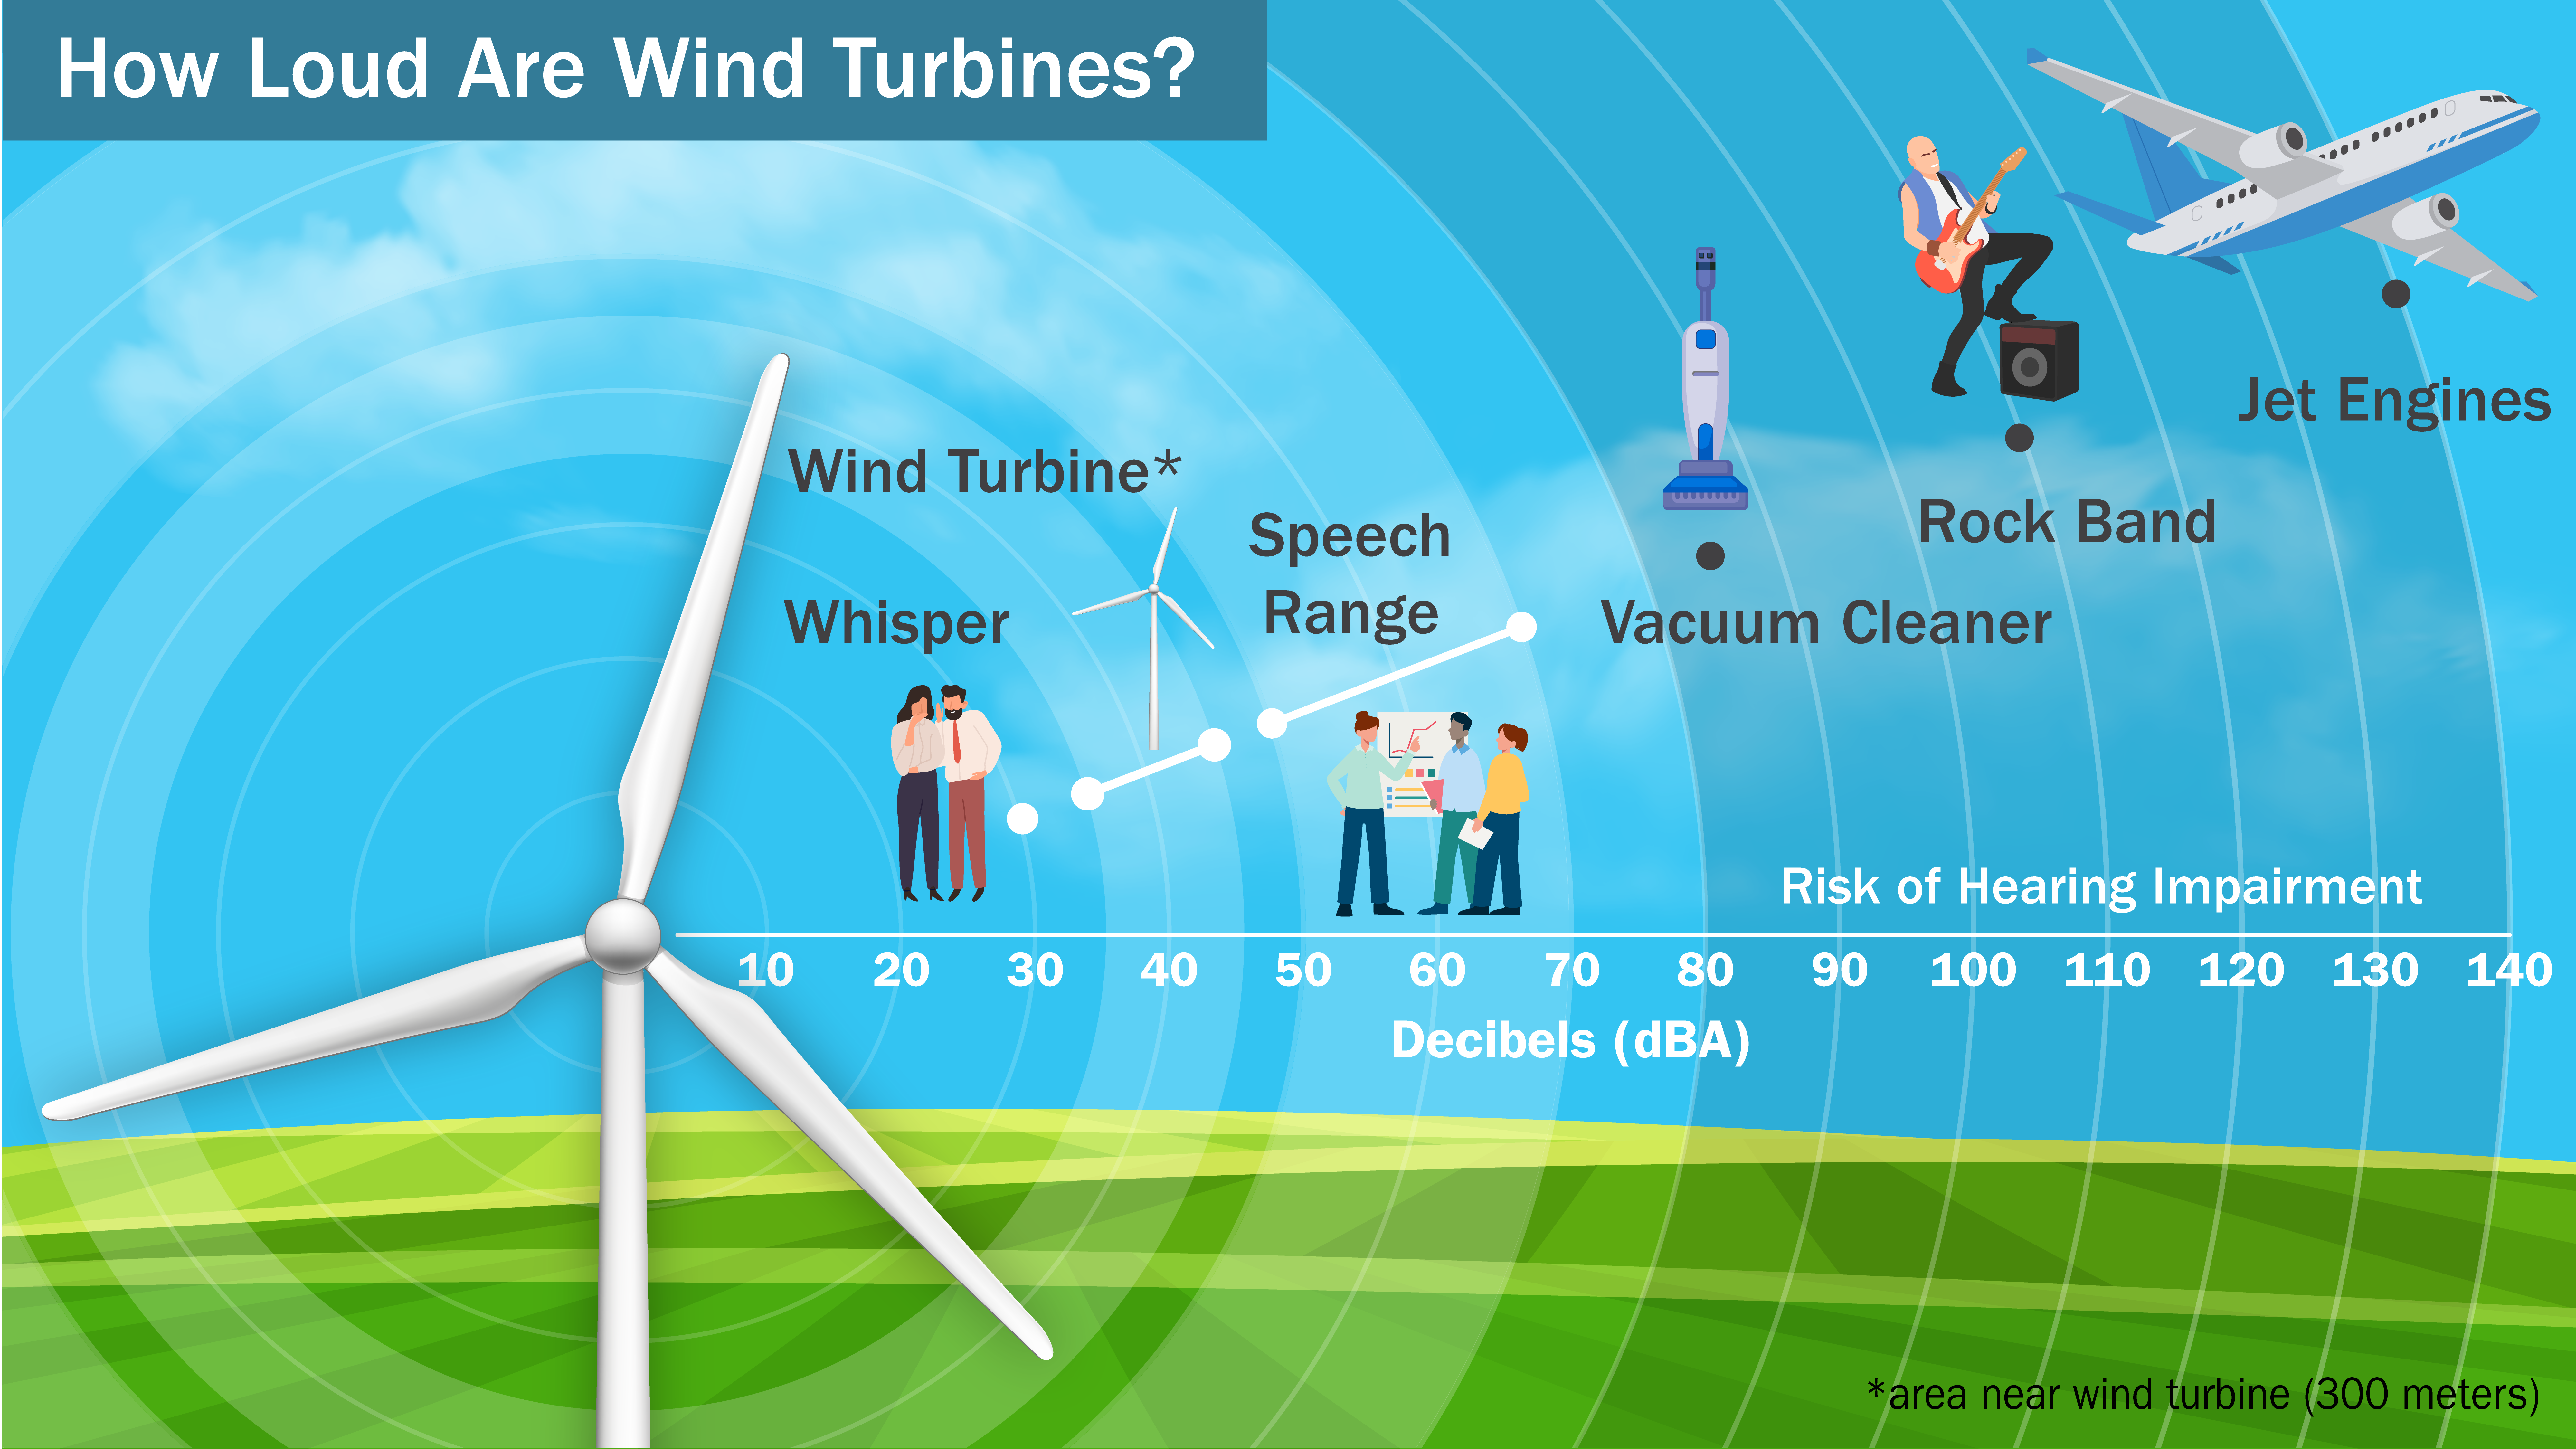 A graphic titled “How Loud Are Wind Turbines?” showing the noise level of a wind turbine at 300 meters away (35–45 decibels) compared to a whisper (30 decibels), typical speech range (50–70 decibels), a vacuum cleaner (85 decibels), a rock band (110 decibels), and jet engines (140 decibels)